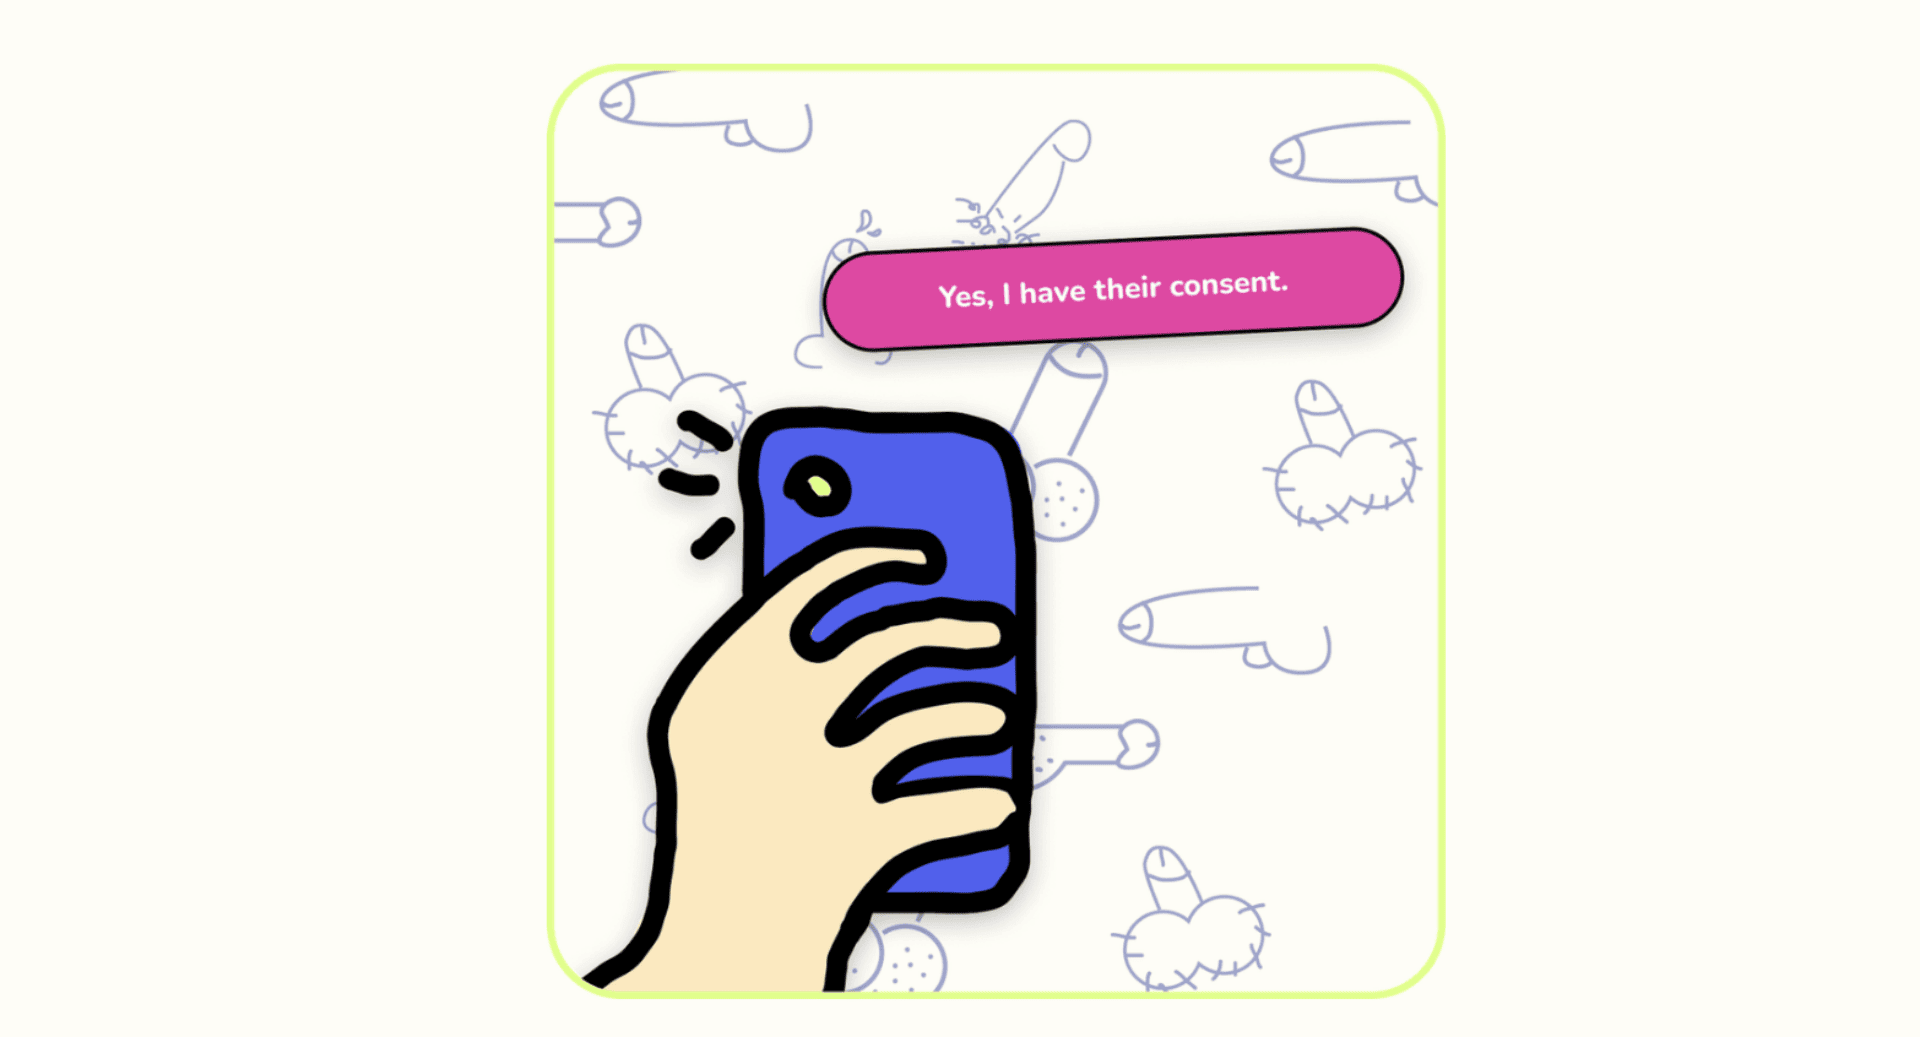 Illustration of a hand holding a smartphone with a speech bubble saying "yes, I have their consent" against a background with thumbprint icons and STI signs.